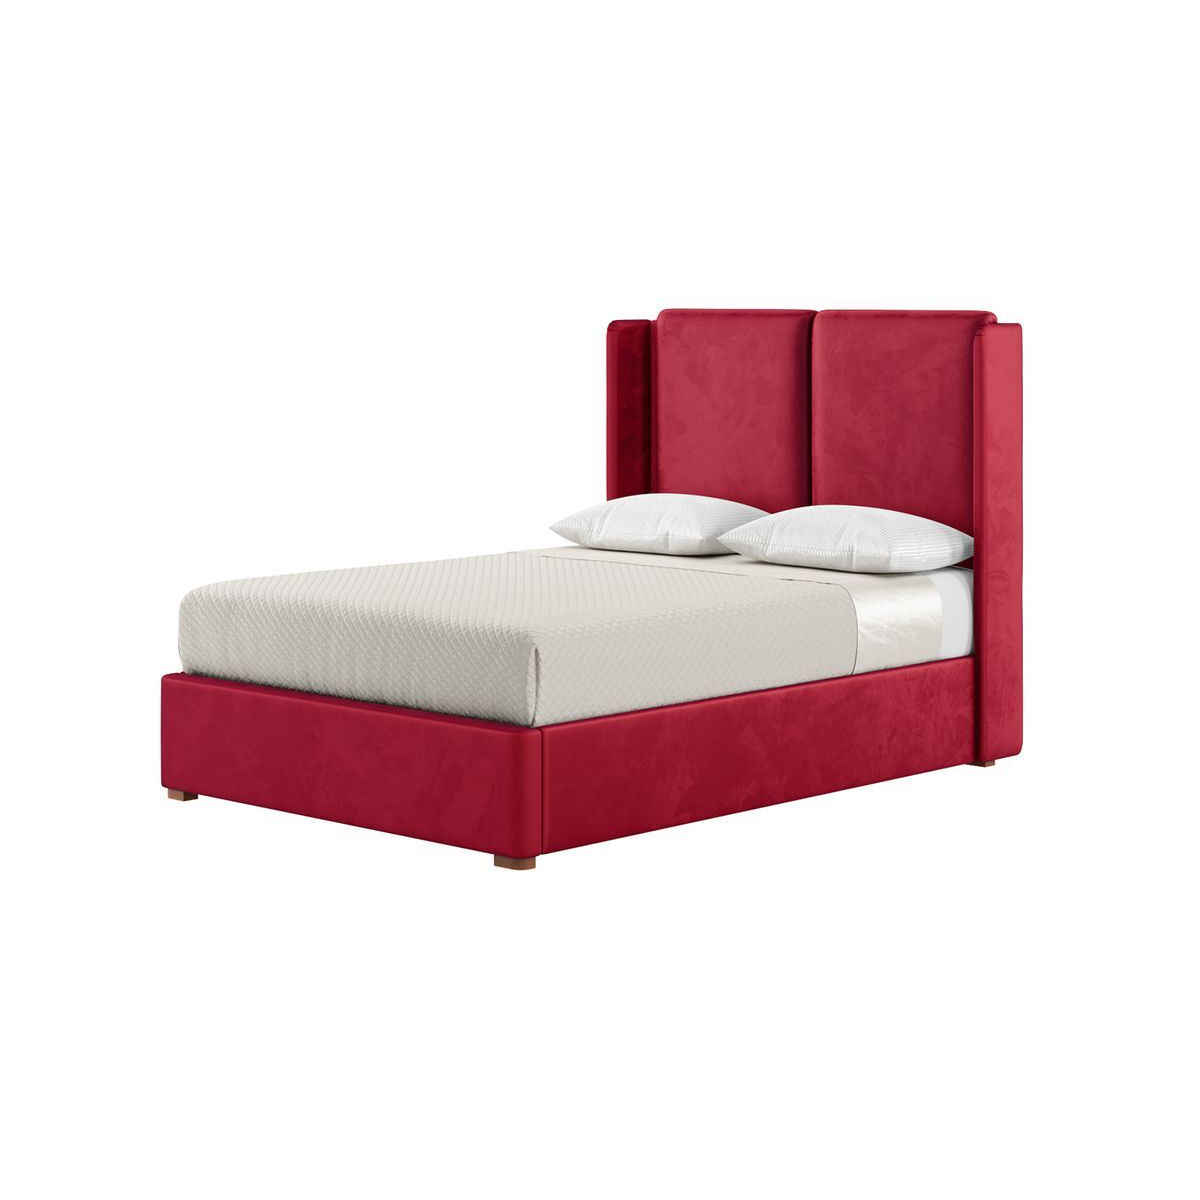 Felix 4ft6 Double Bed Frame With Contemporary Twin Panel Wing Headboard, dark red, Leg colour: aveo - image 1